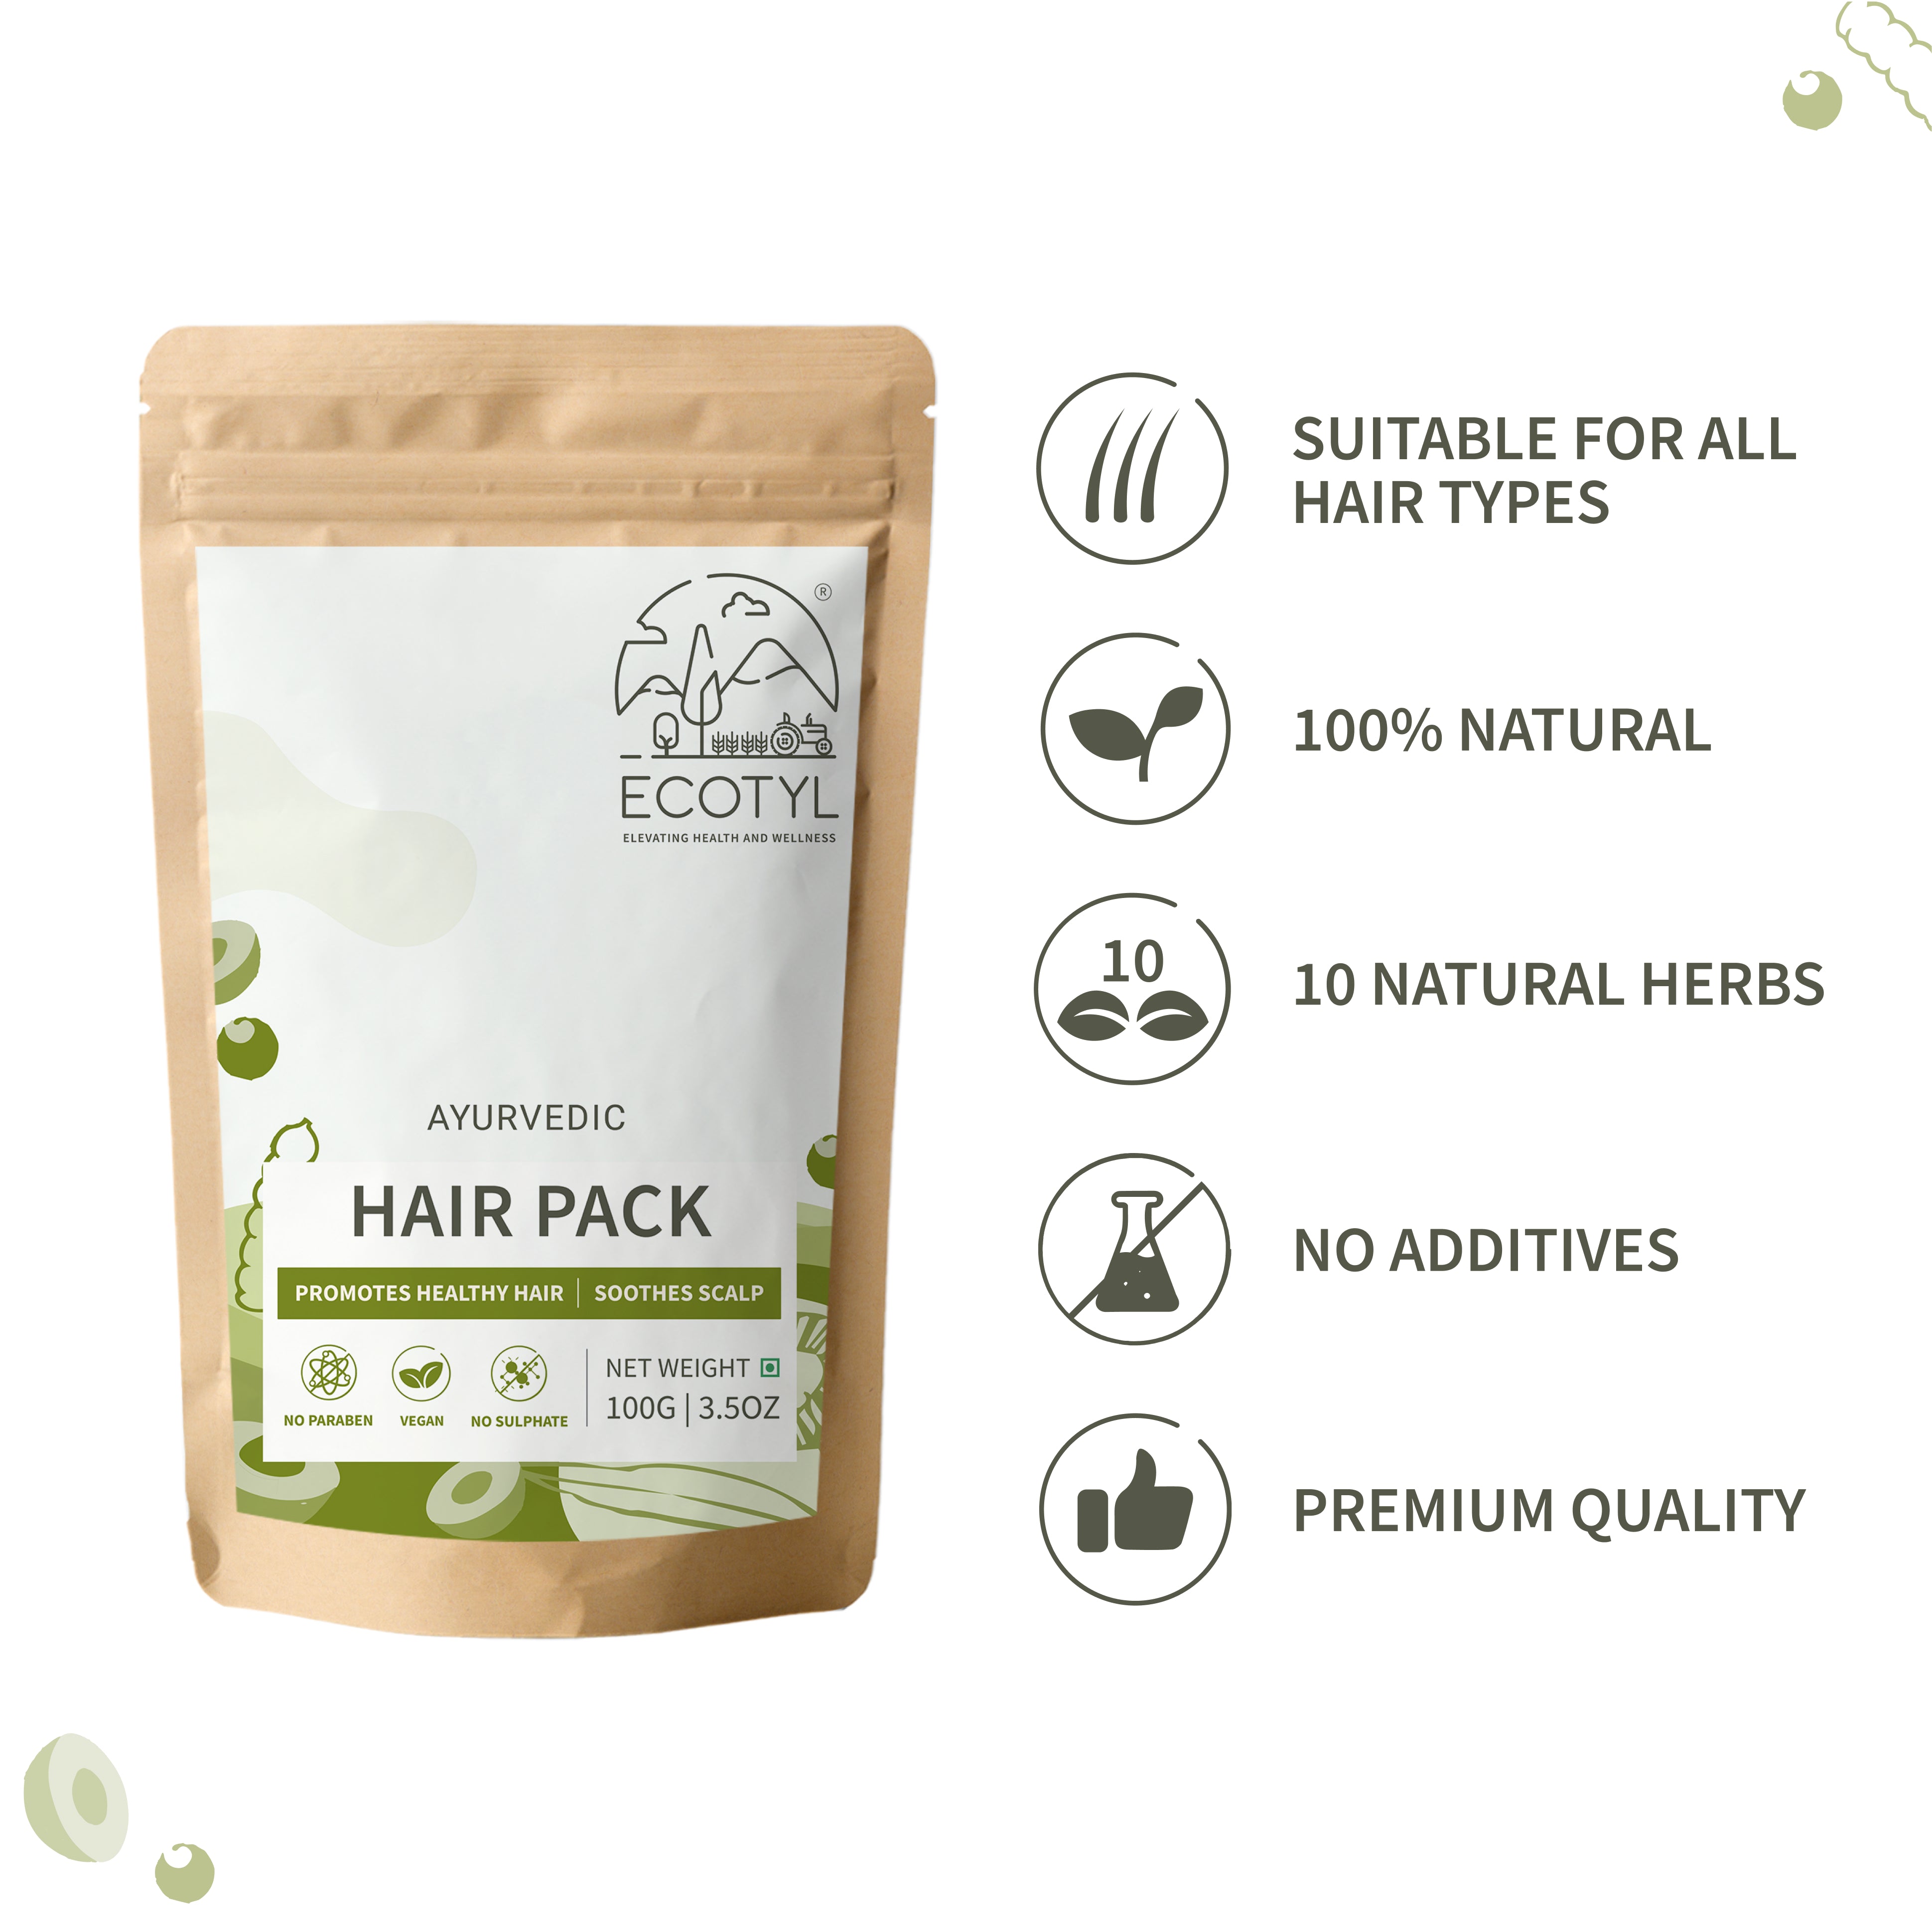 Ecotyl Ayurvedic Hair Pack | For Hair Conditioning & Strenghtening | Blend of 10+ Herbs | 100g